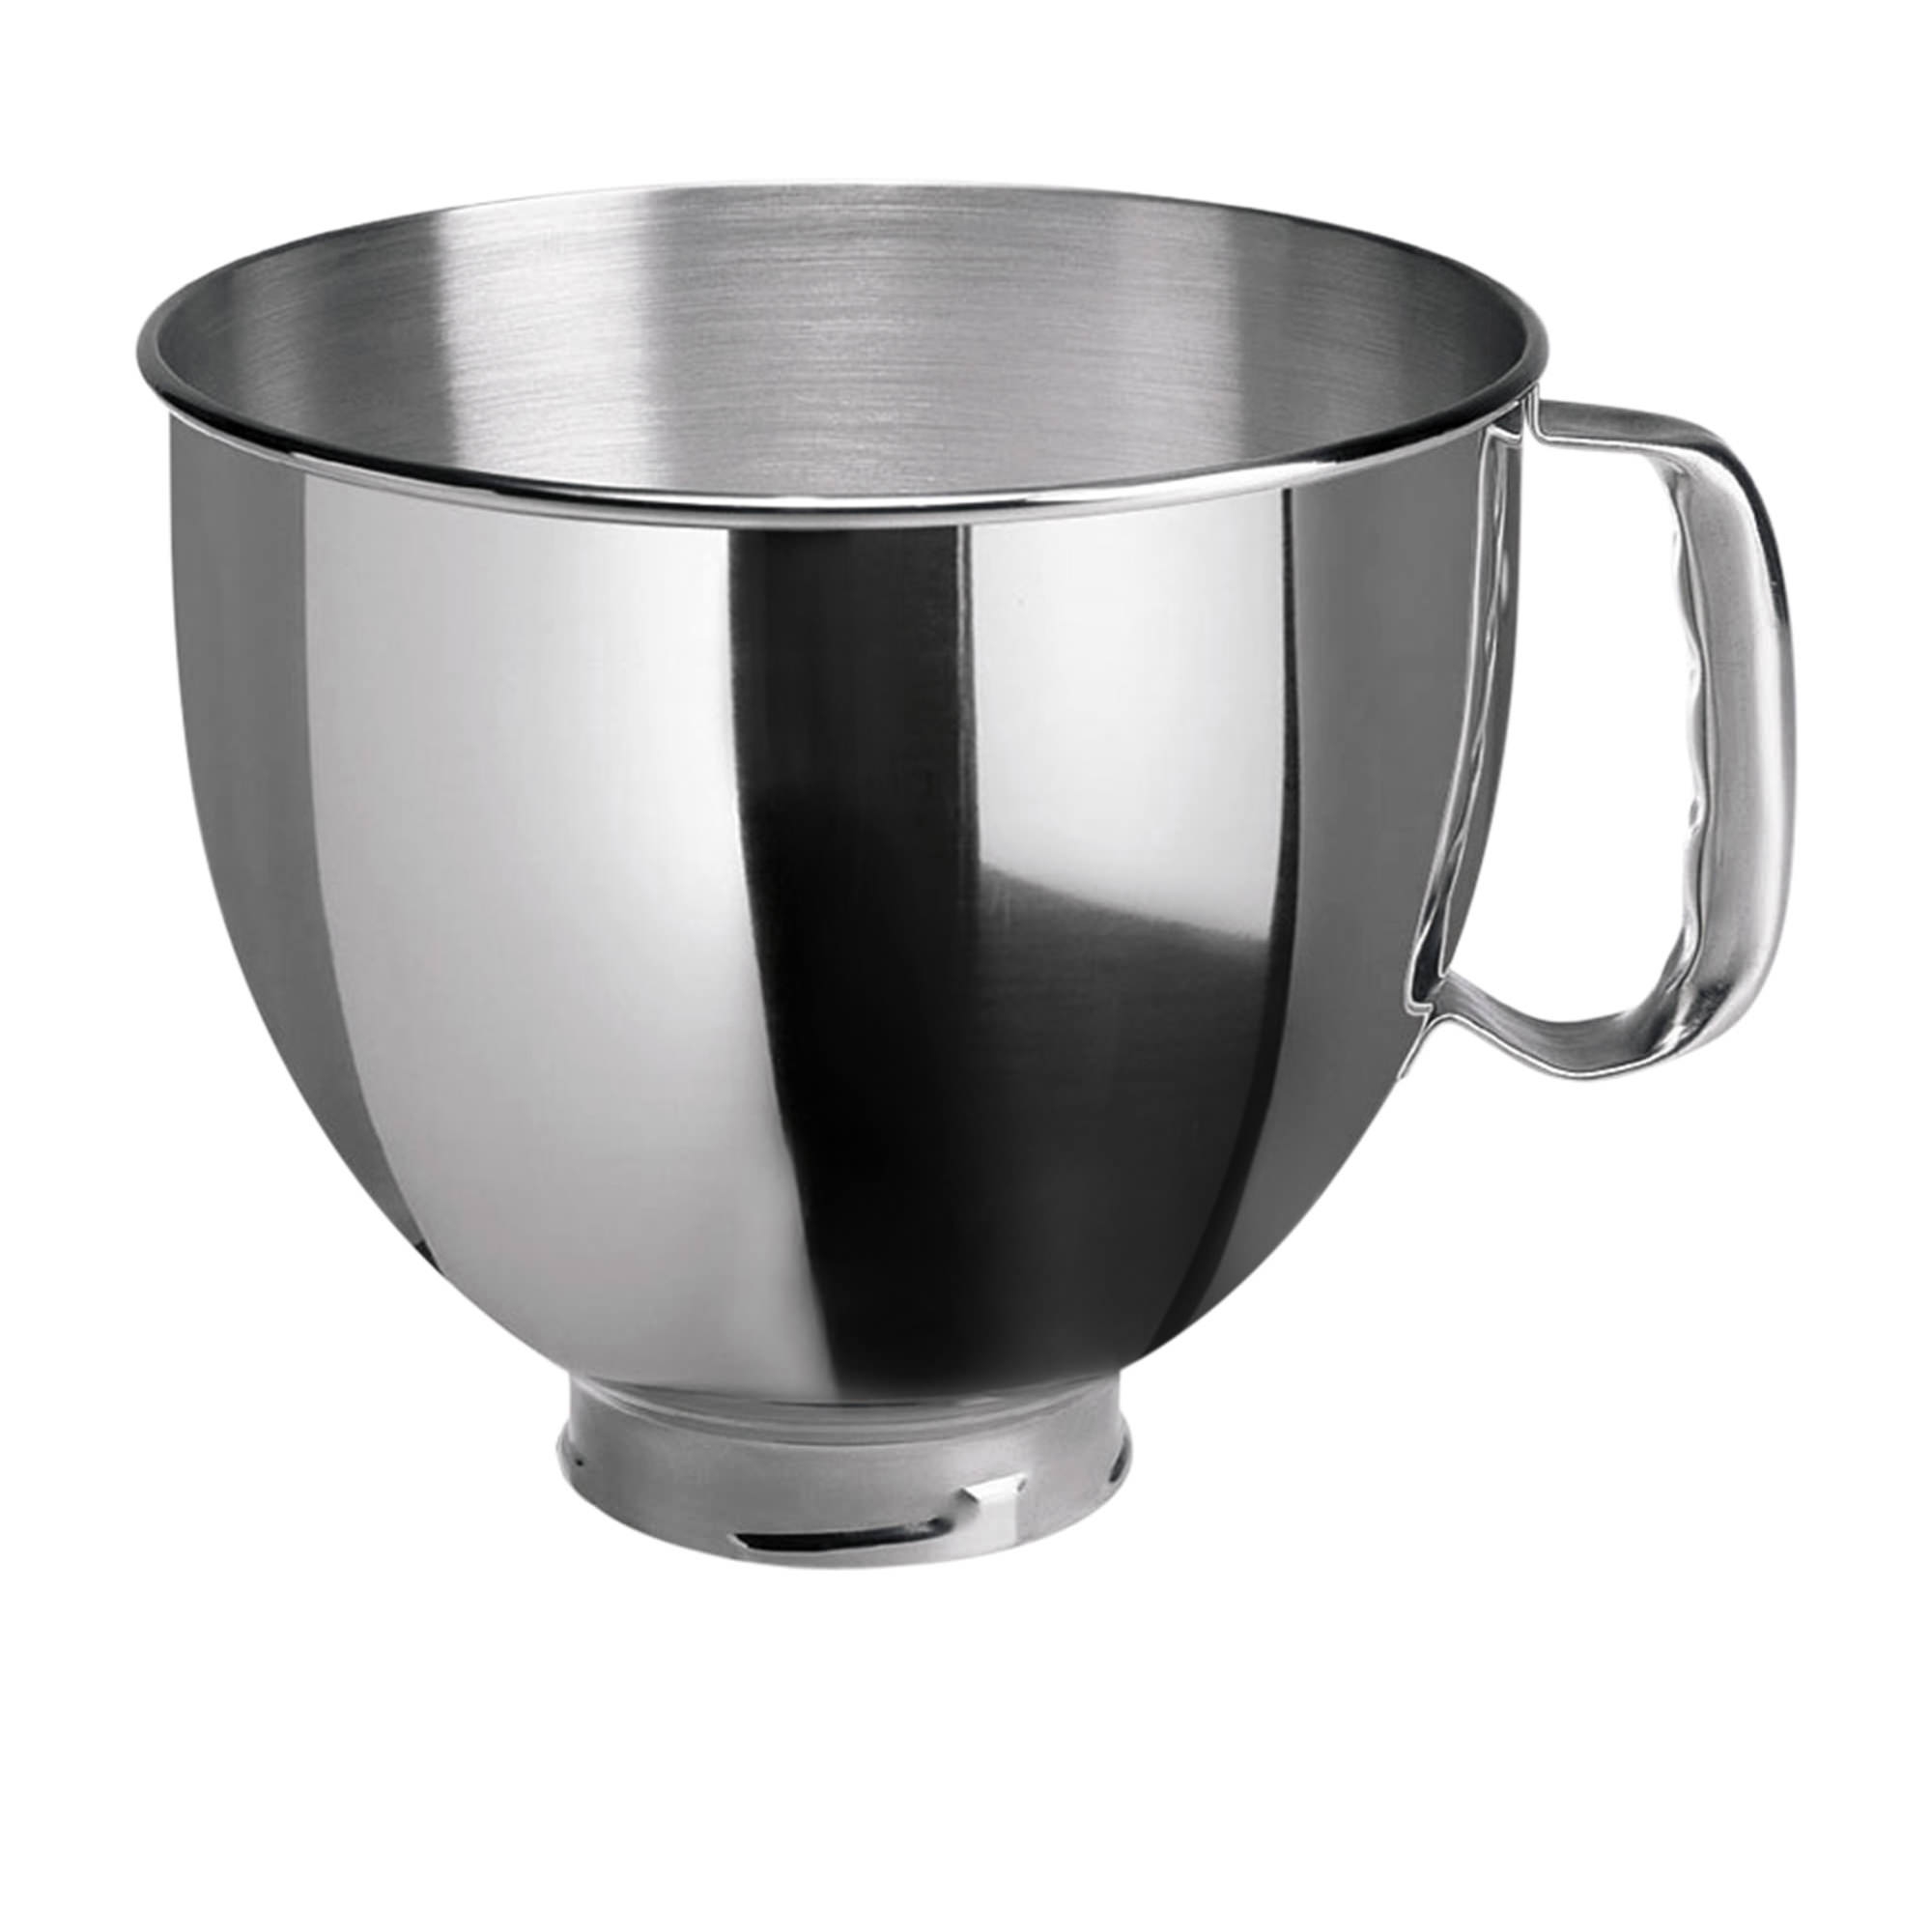 KitchenAid Stainless Steel Mixing Bowl for Tilt-Head Stand Mixer 4.8L Image 1